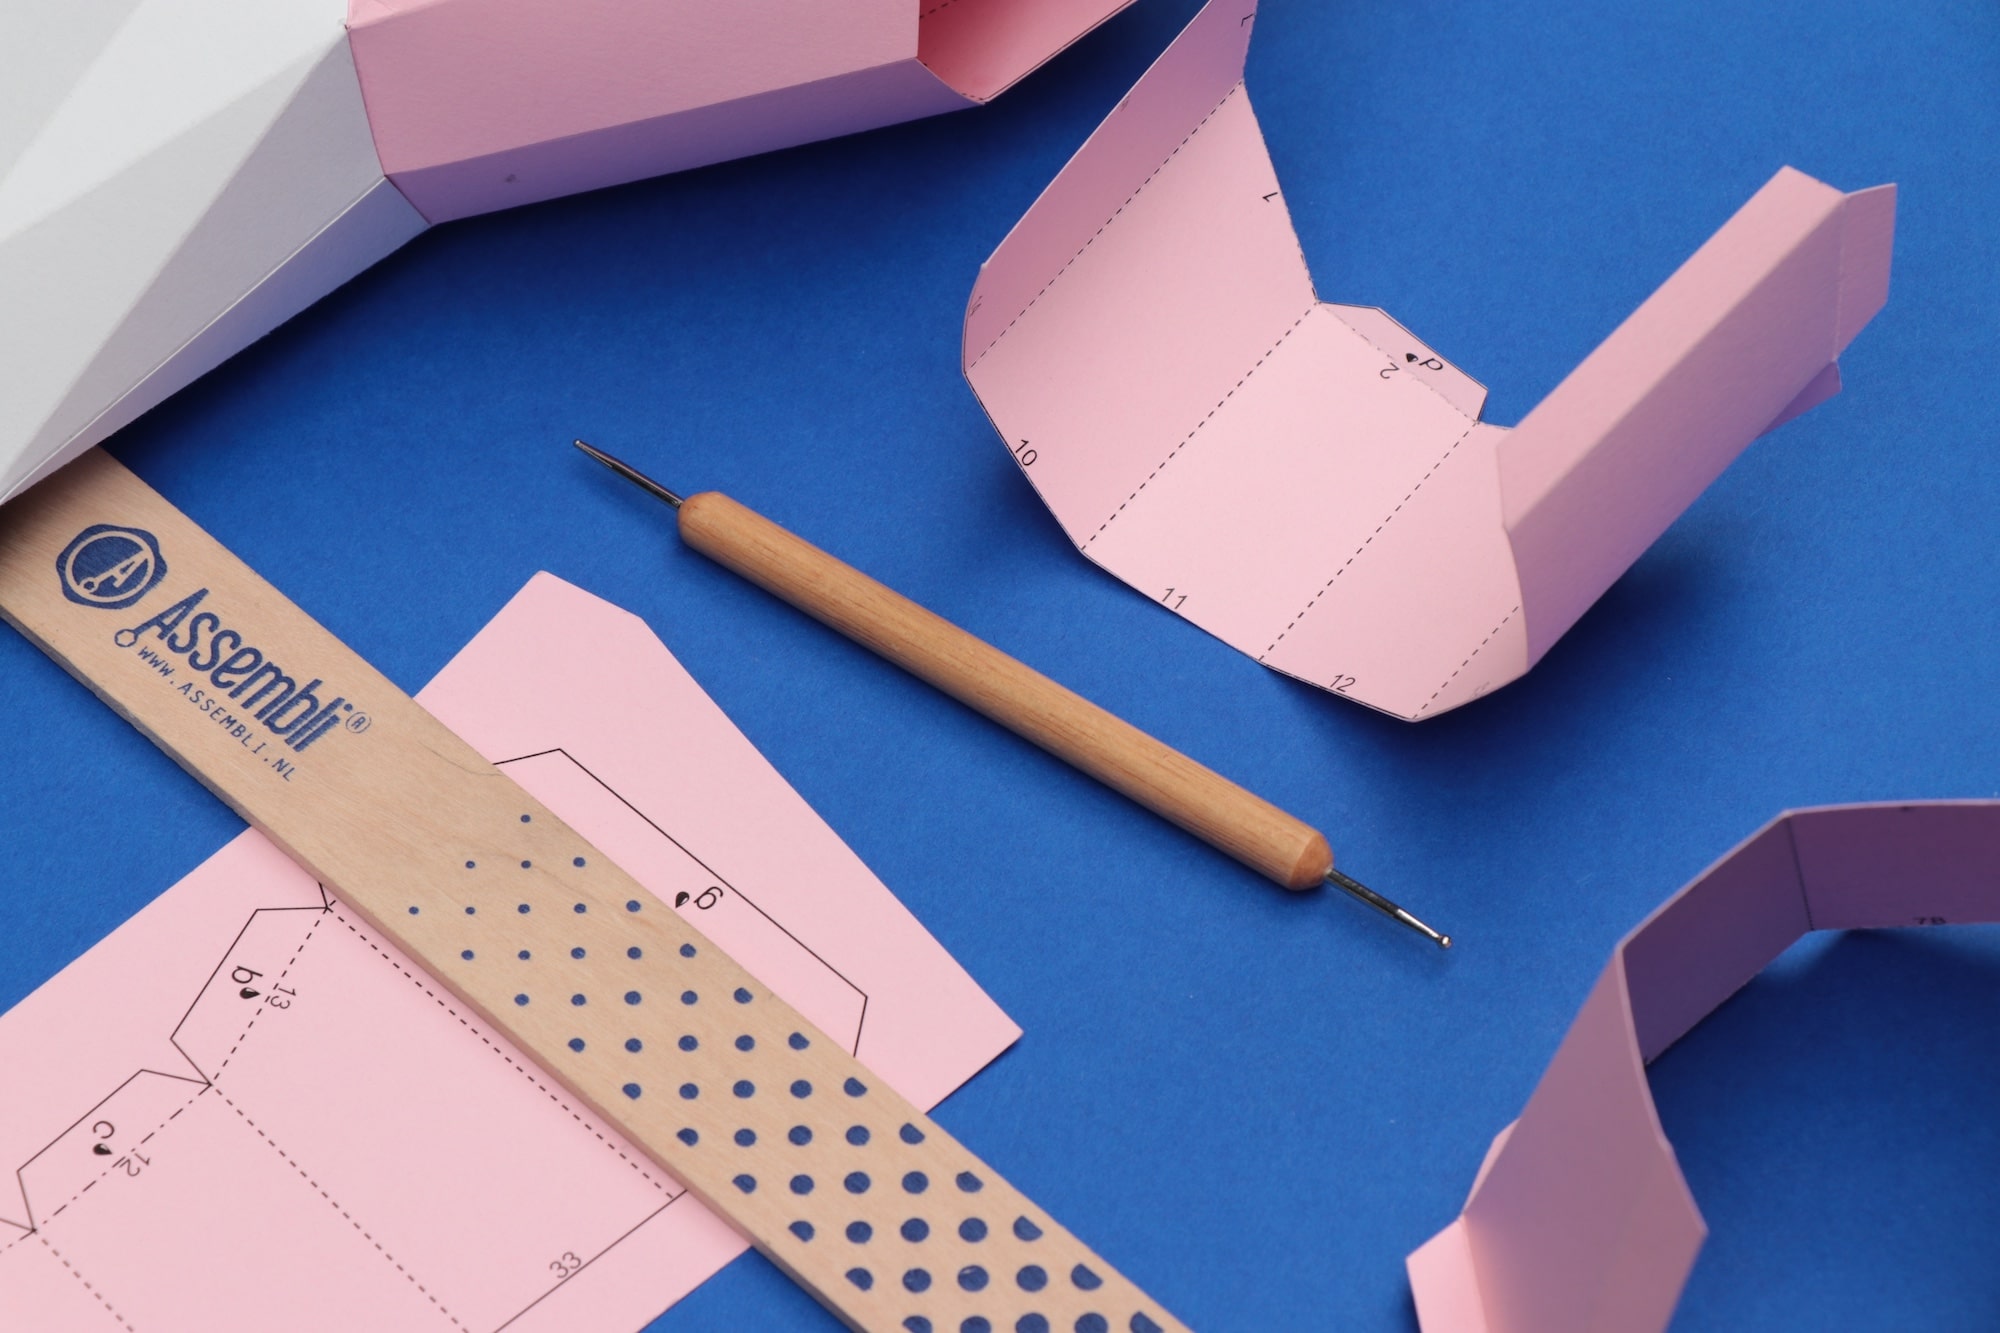 Papercraft Tools: What do you need and how to use